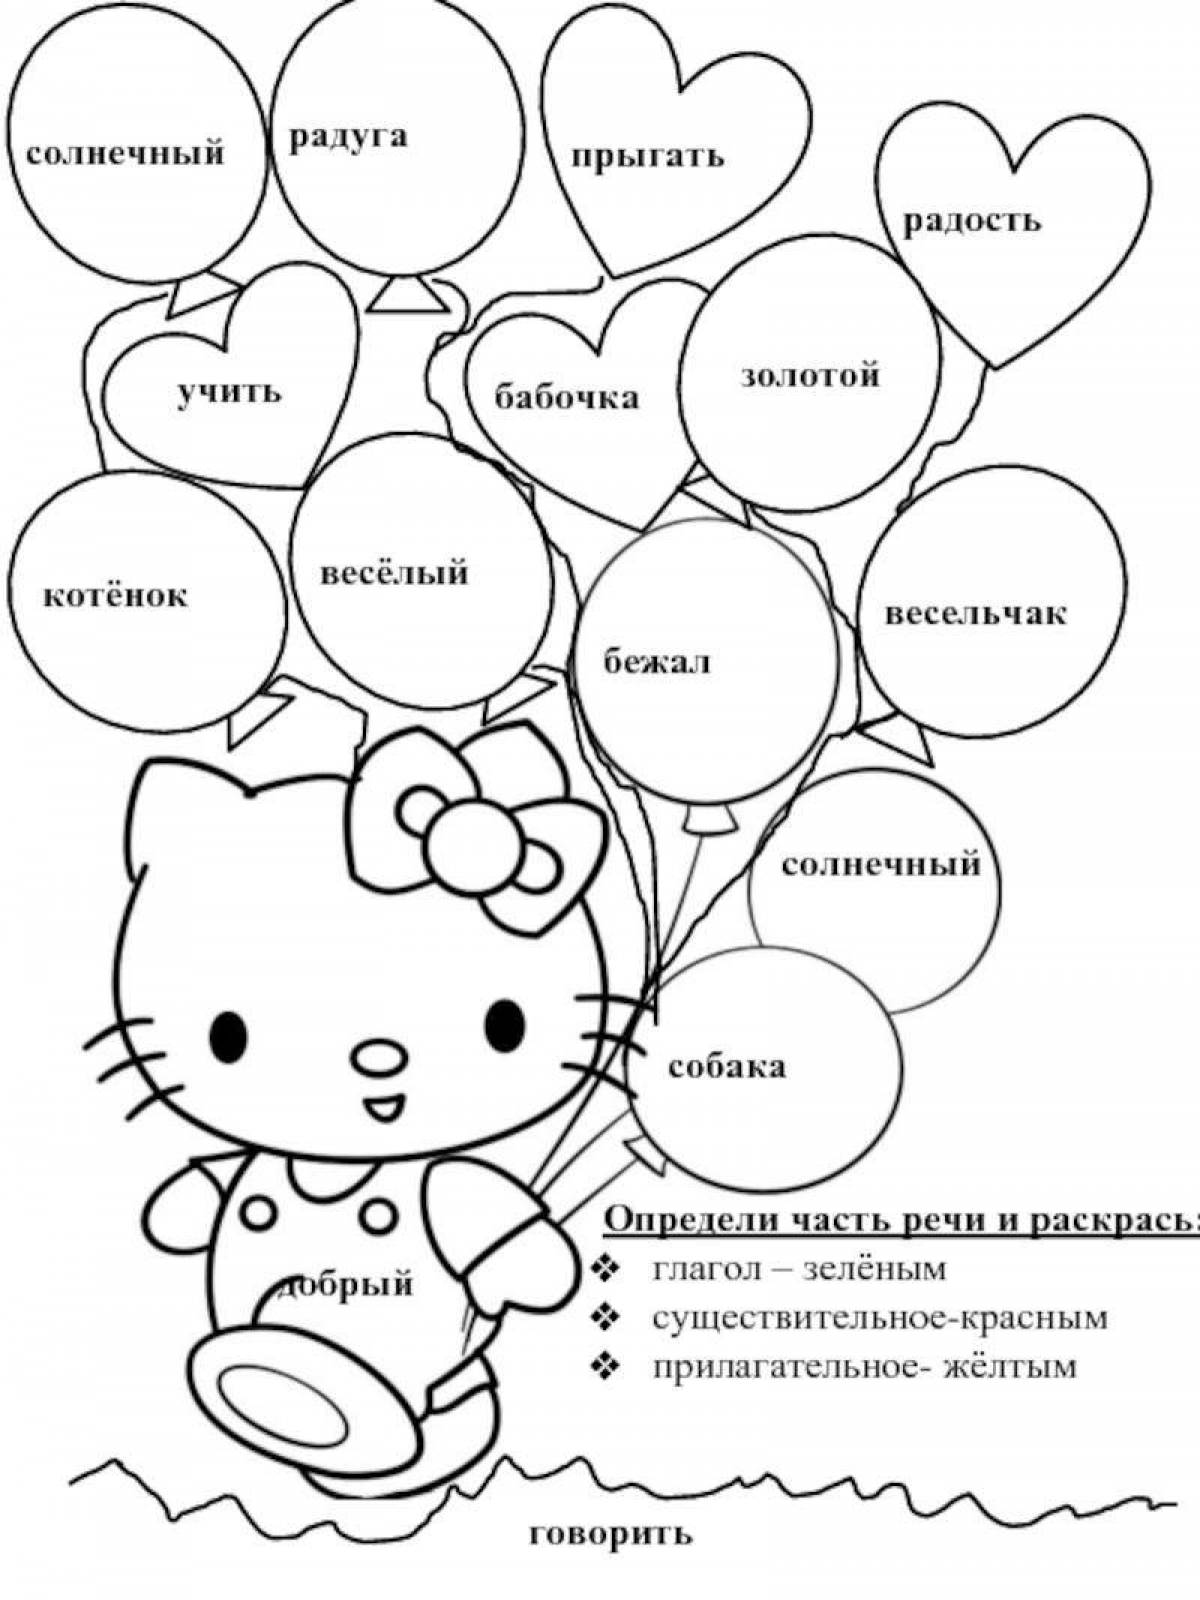 A fascinating coloring book in Russian Grade 1 with interesting tasks